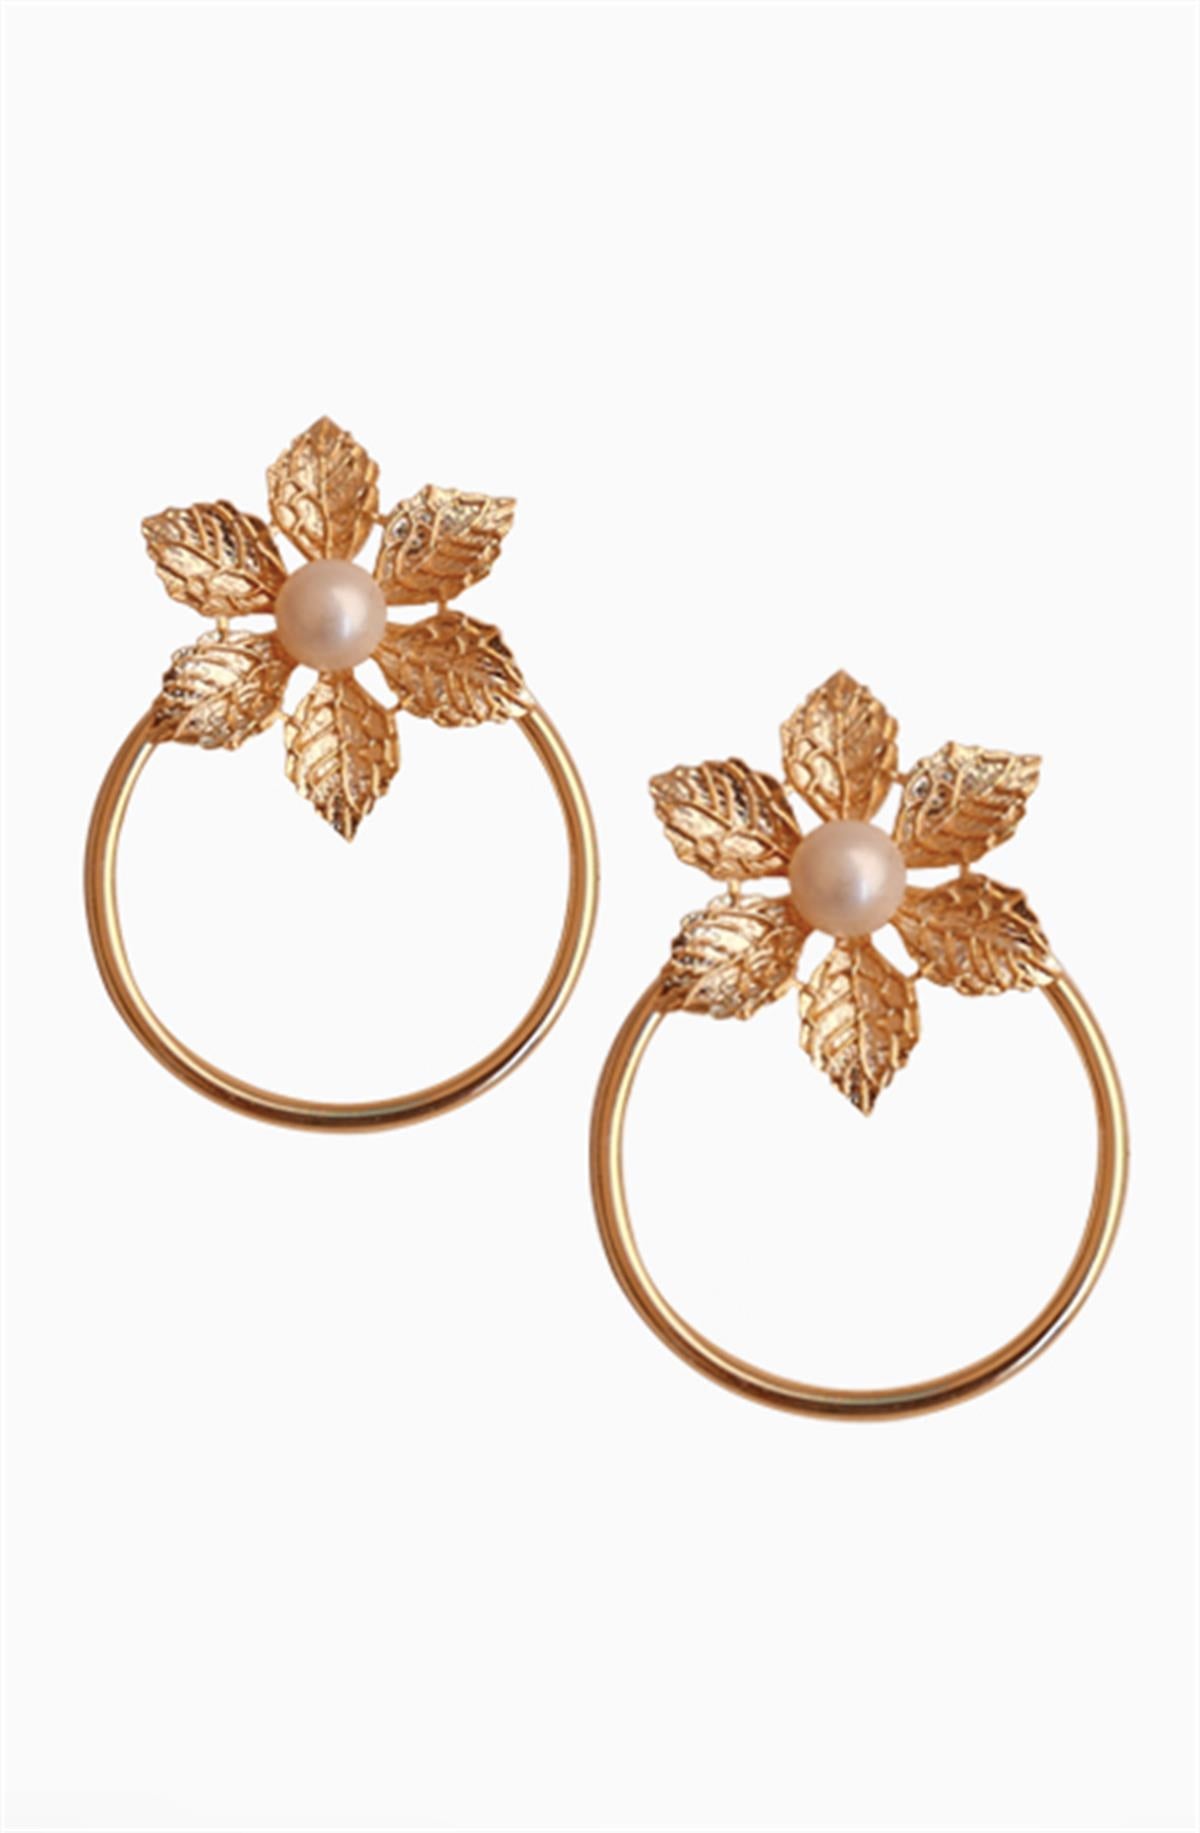 Flower Circle Earrings with Pearls Gold Plated